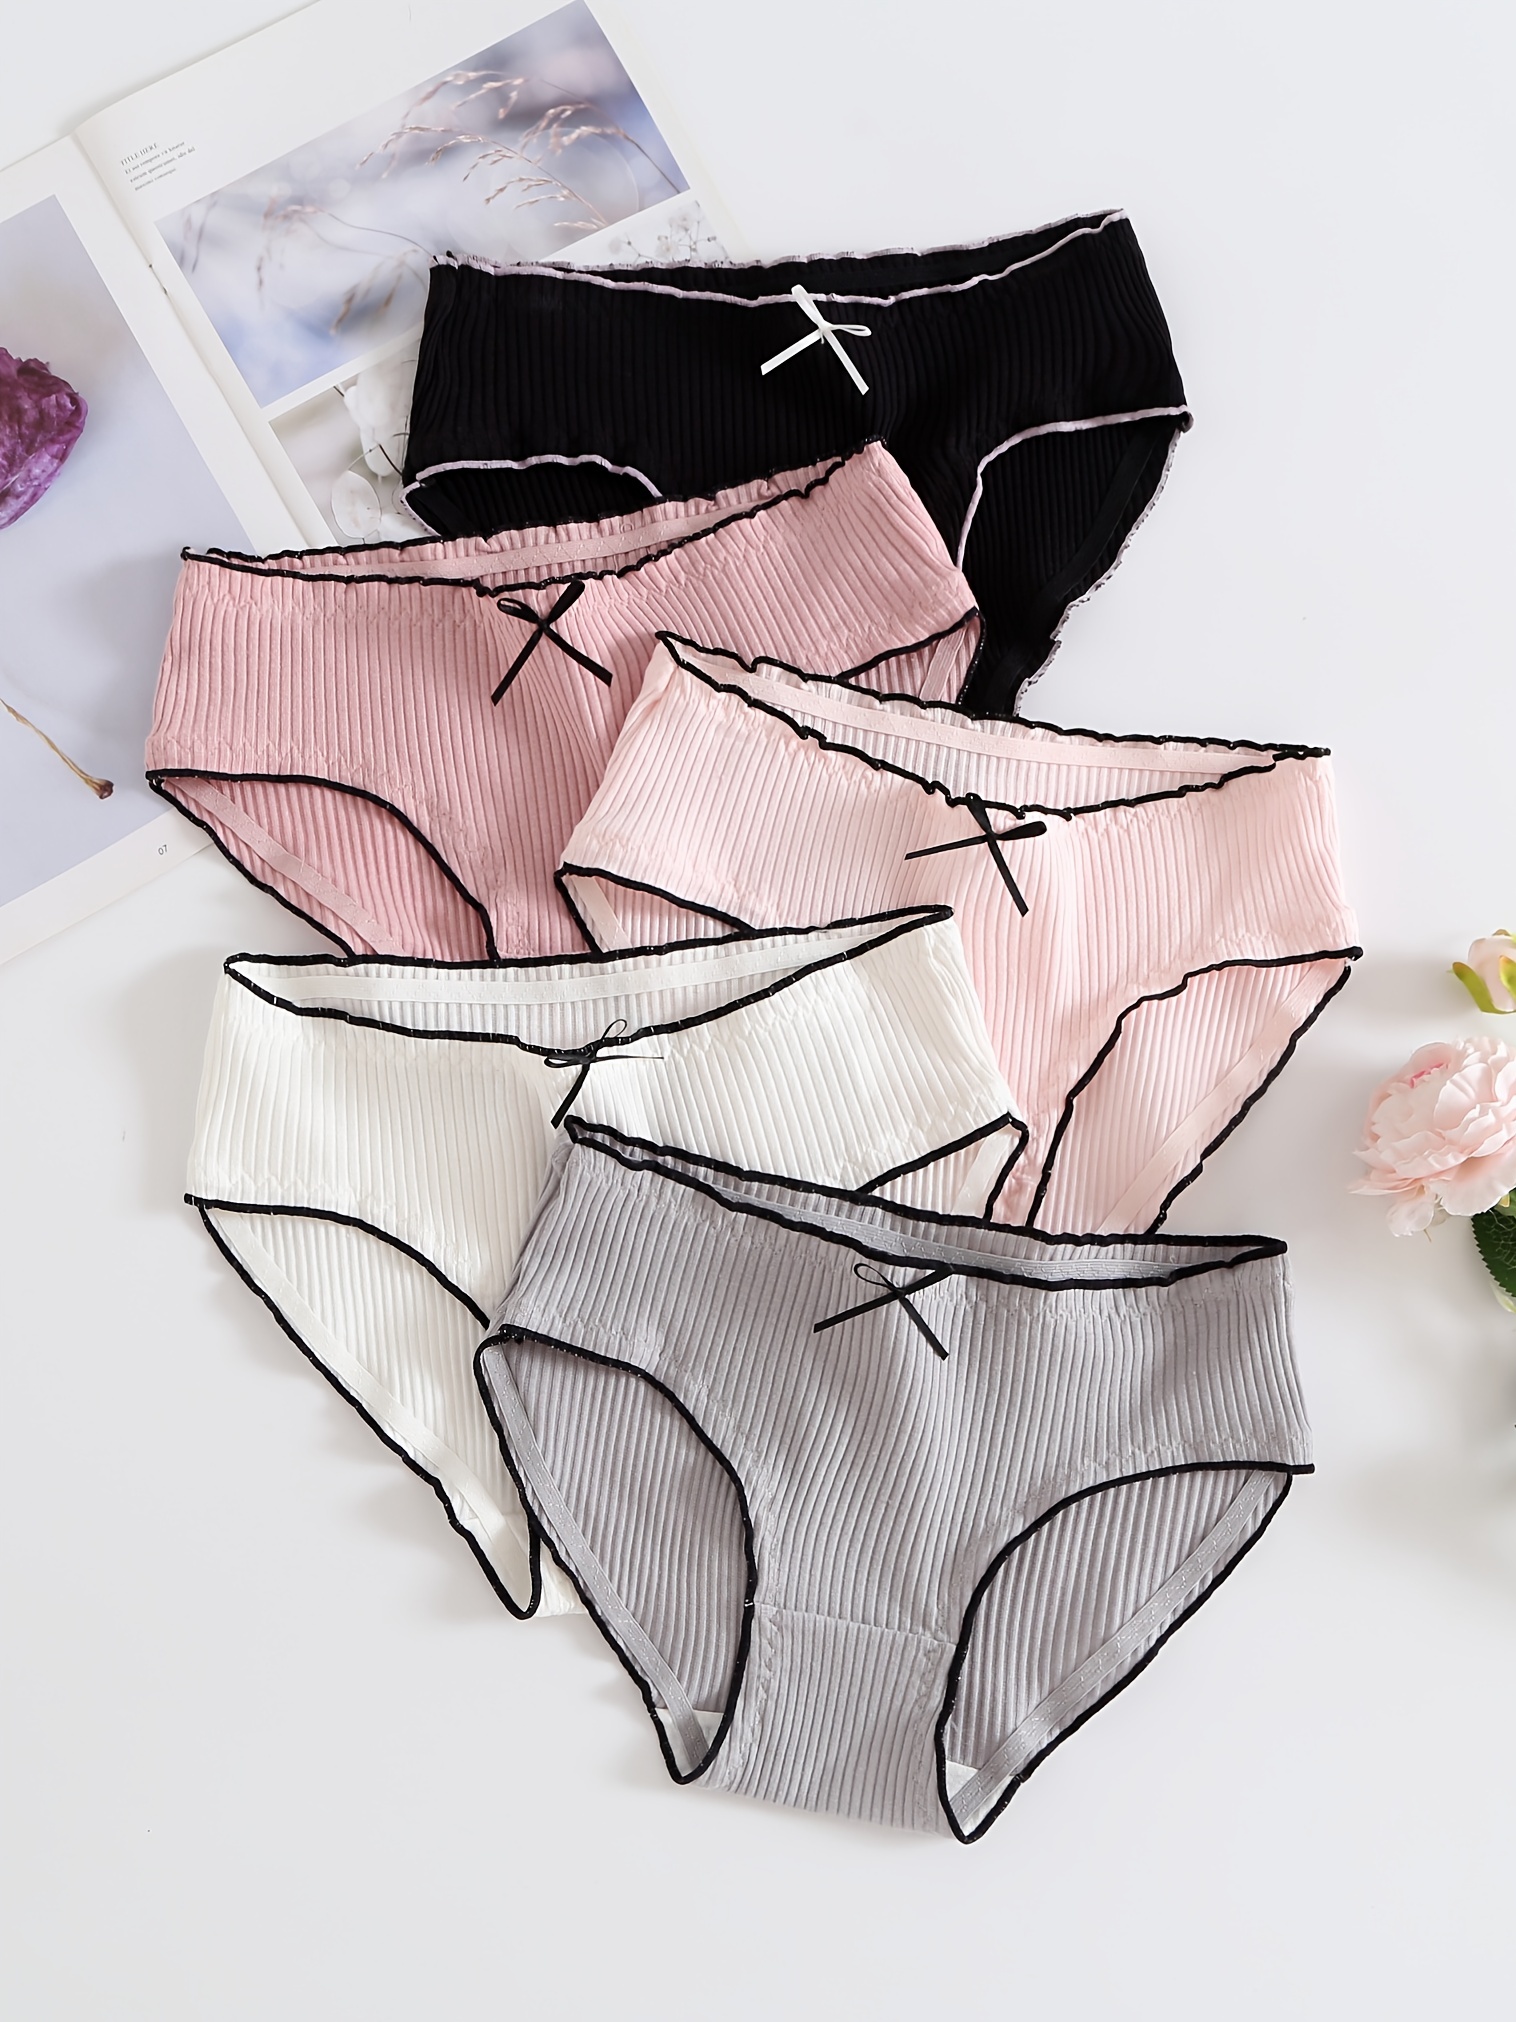 5pcs Bow Tie Ribbed Briefs, Comfy & Cute Stretchy Intimates Panties,  Women's Lingerie & Underwear